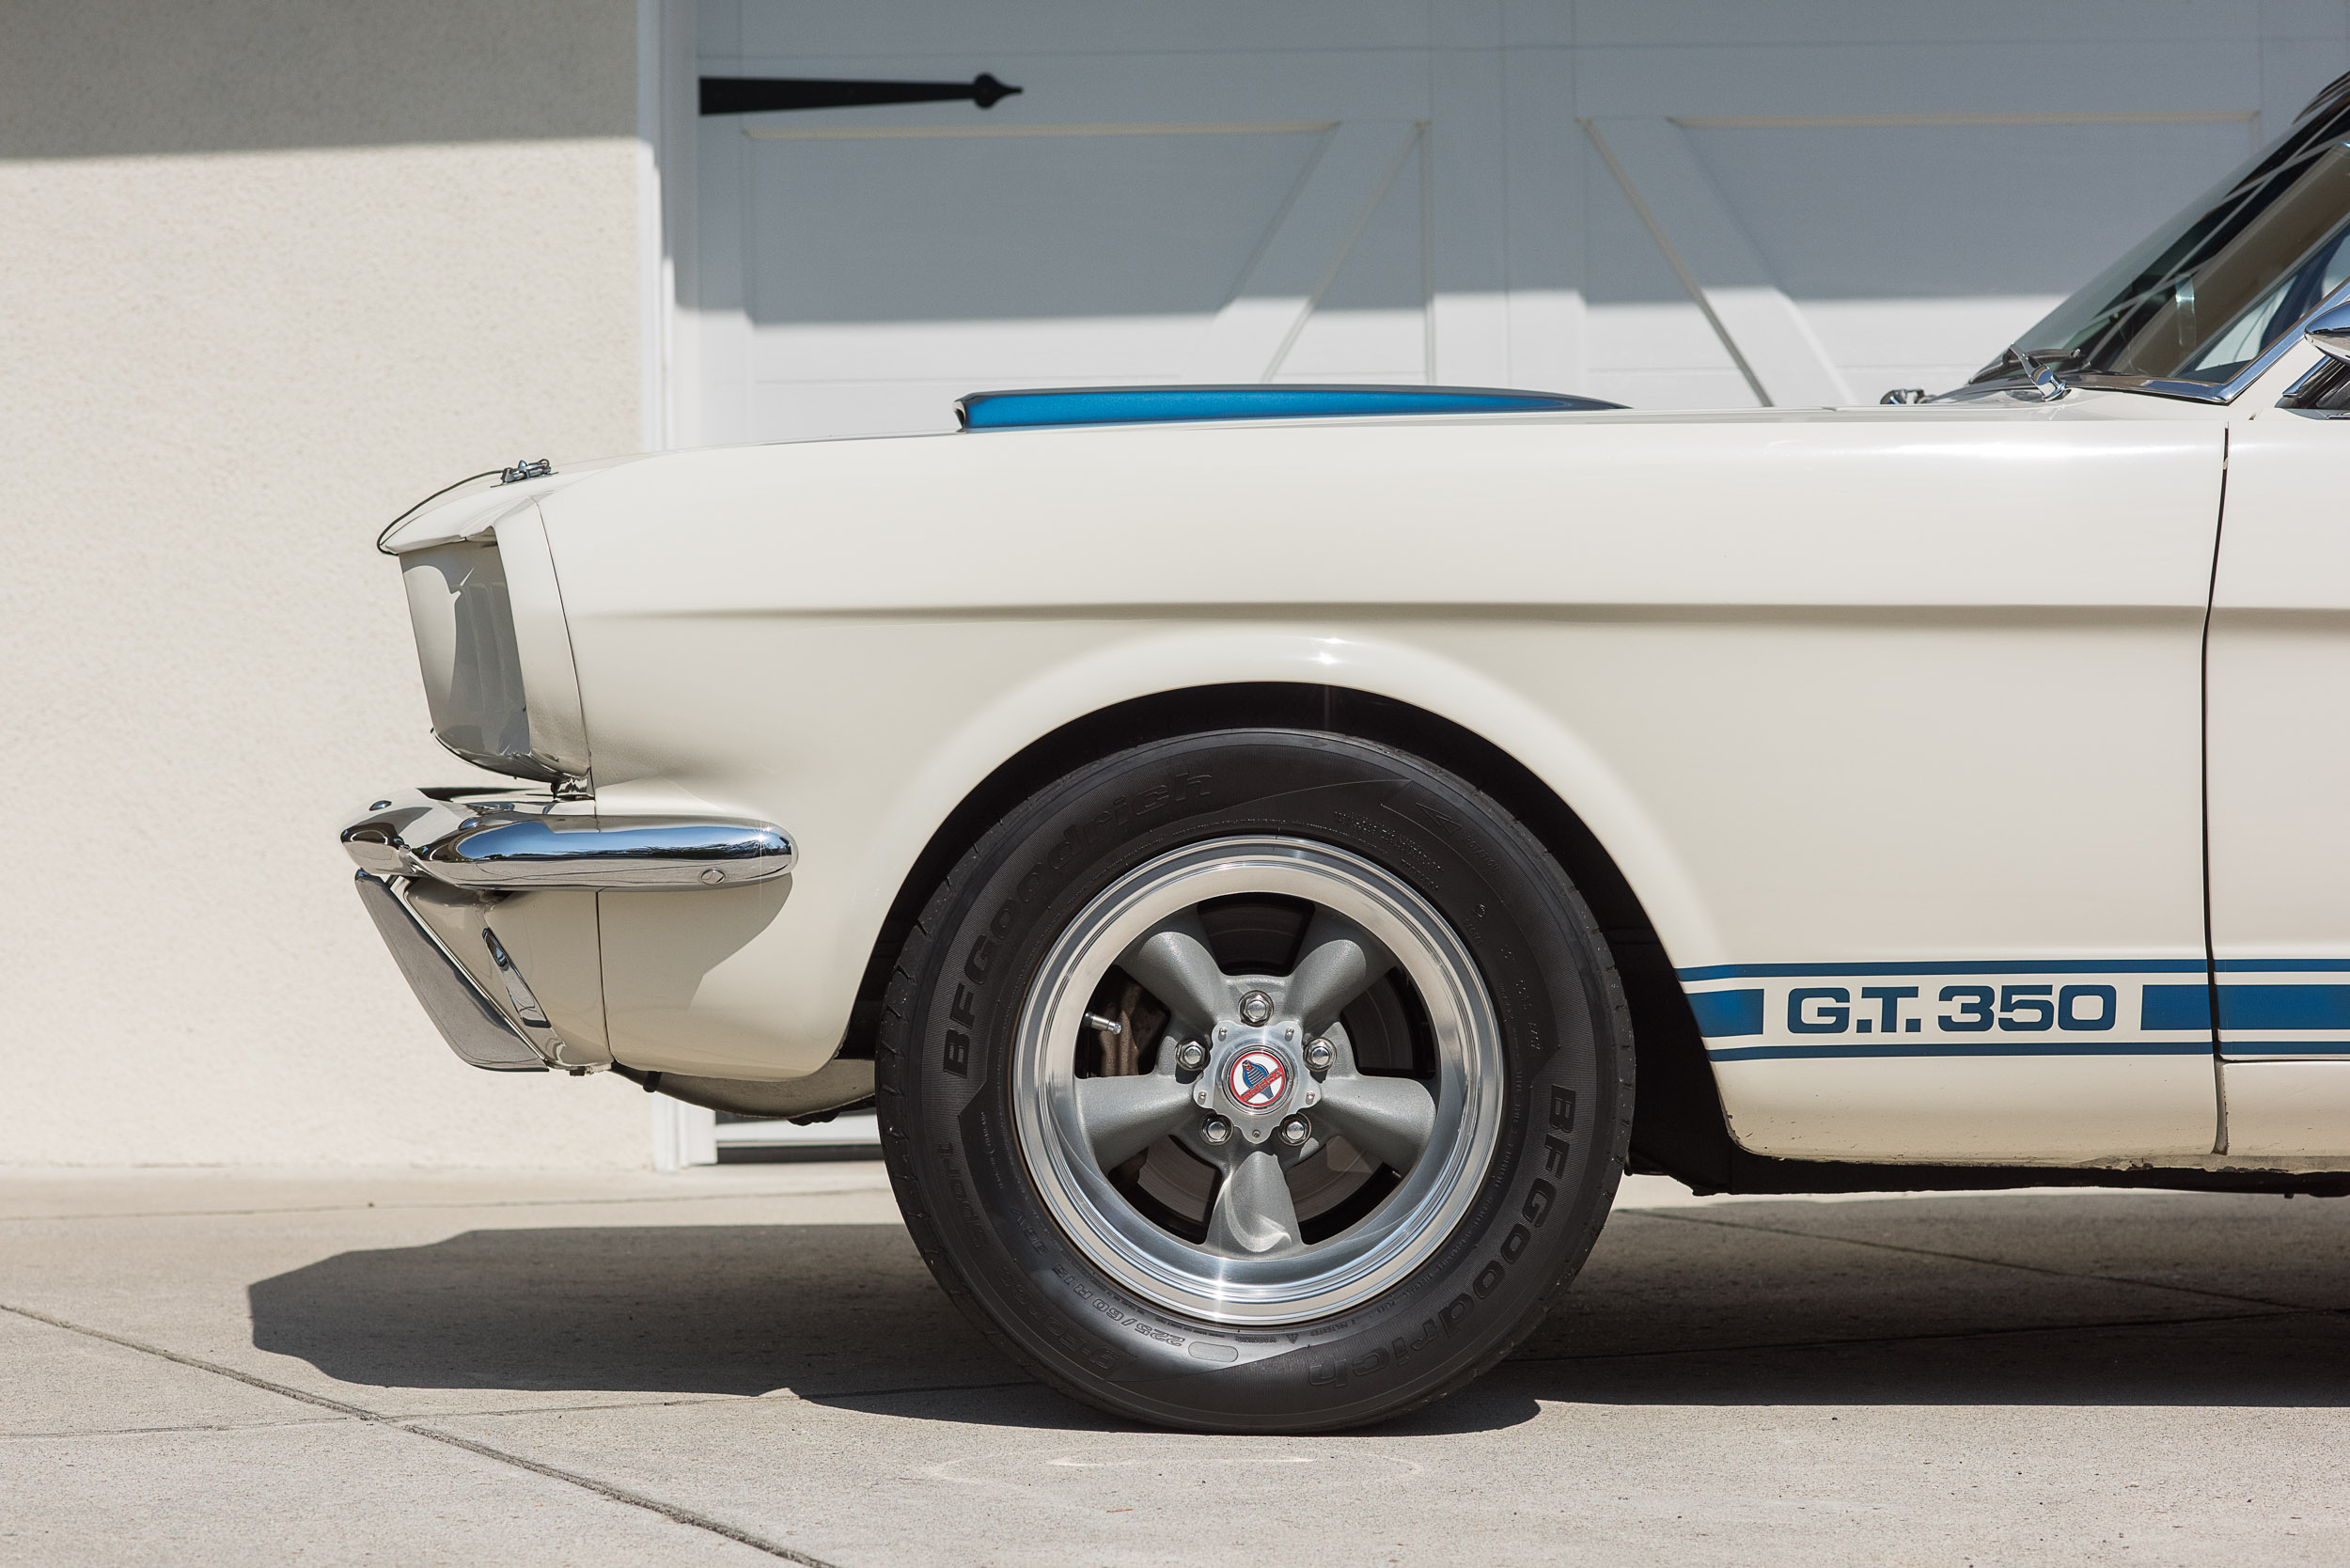 Detail of the front of a 1966 Shelby Mustang GT350 in Los Angeles.